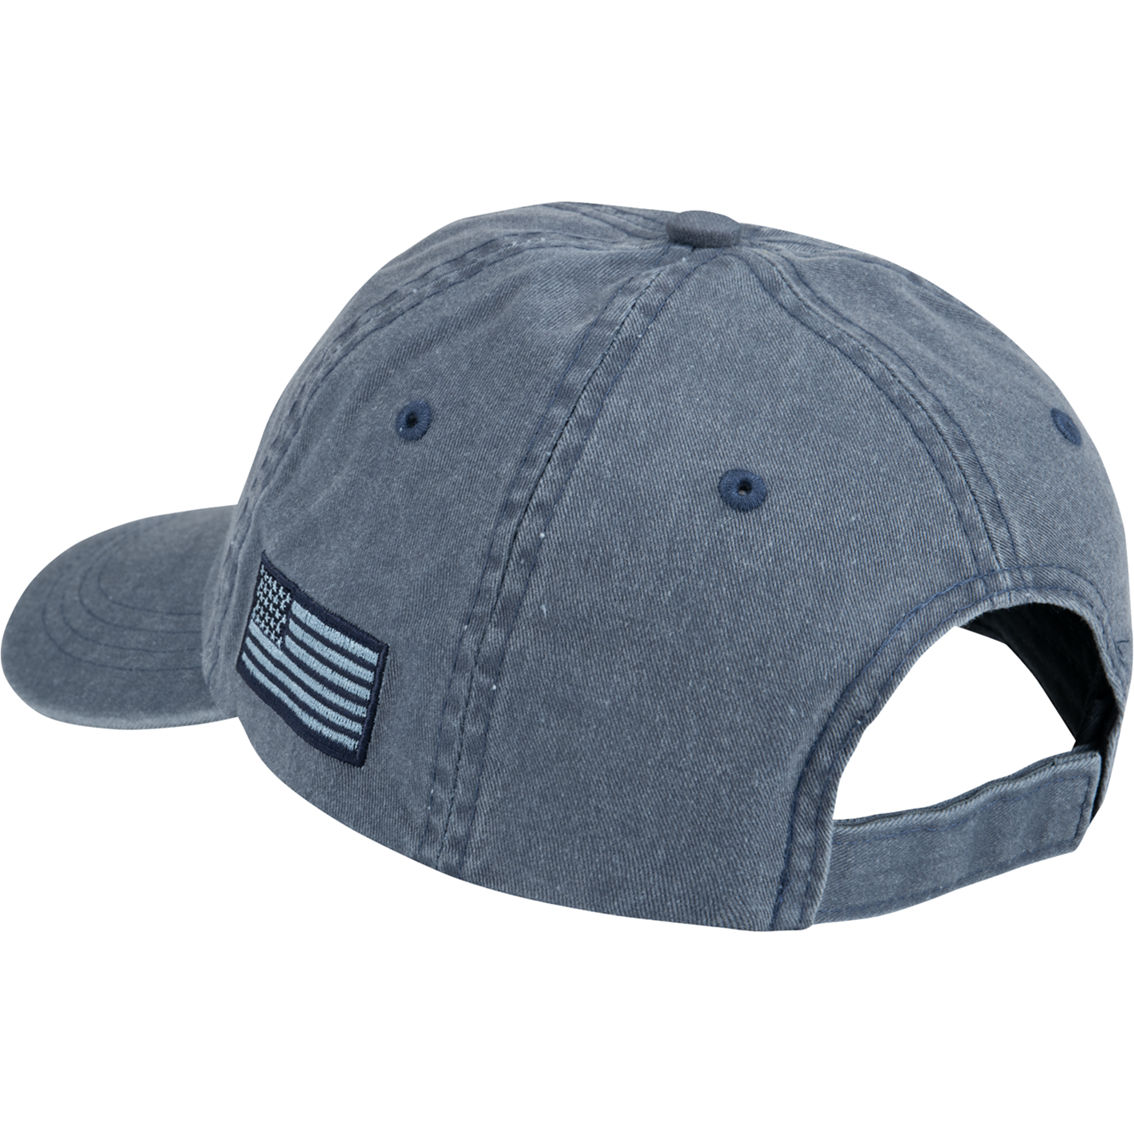 Blync Washed Charcoal Air Force Cap - Image 3 of 3